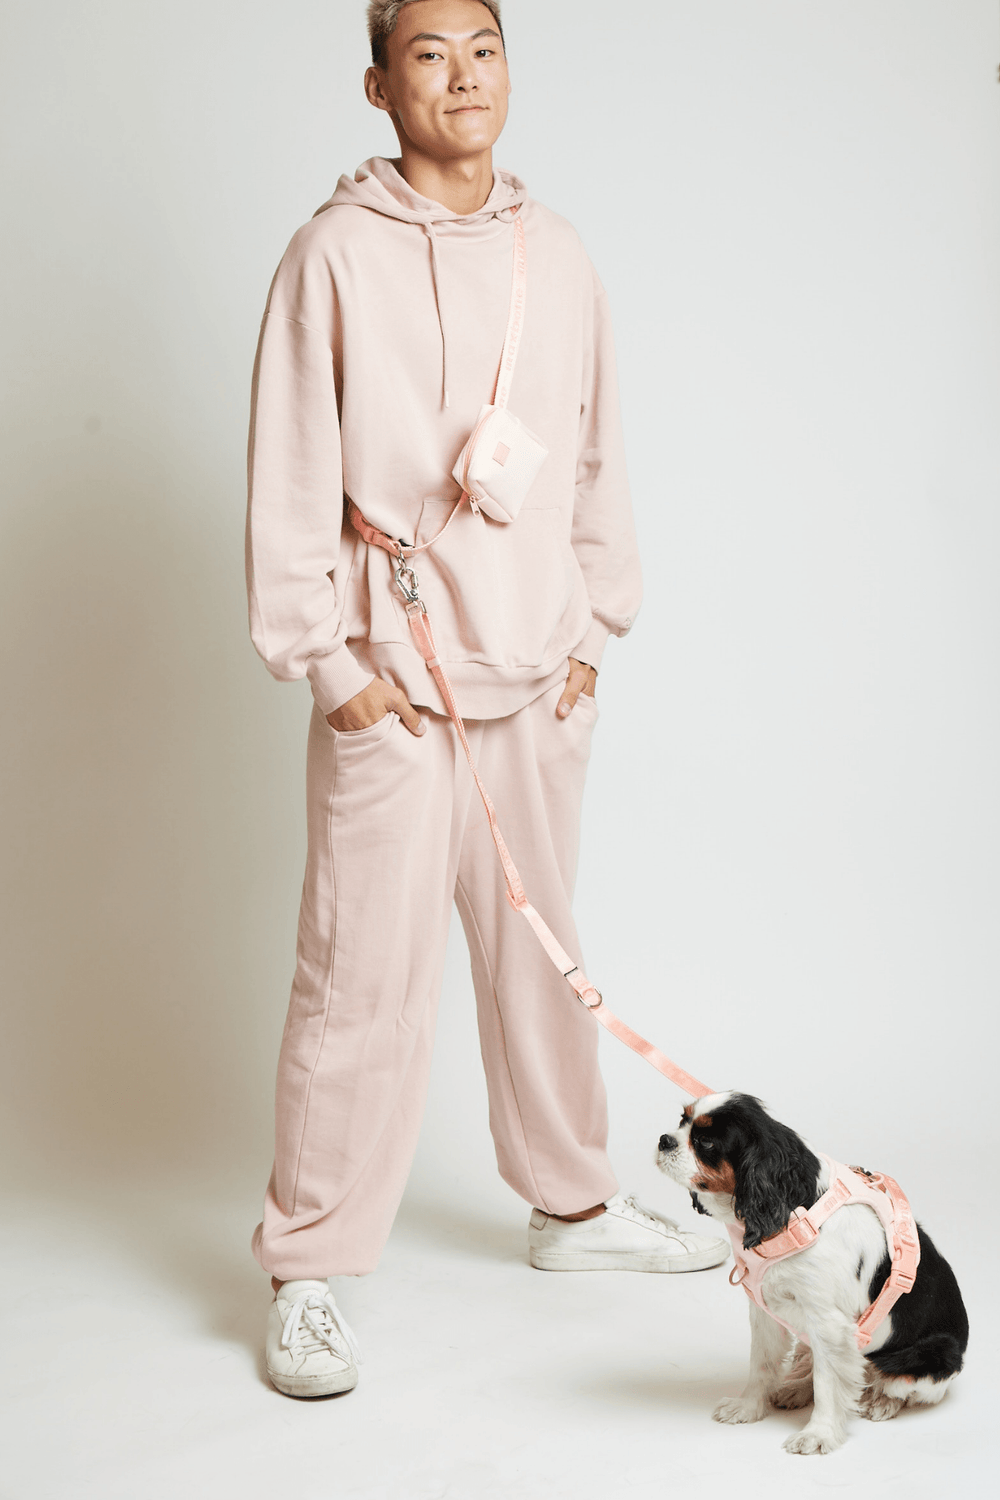 a model wearing the treat pack connected to the leash and dog harness in peach